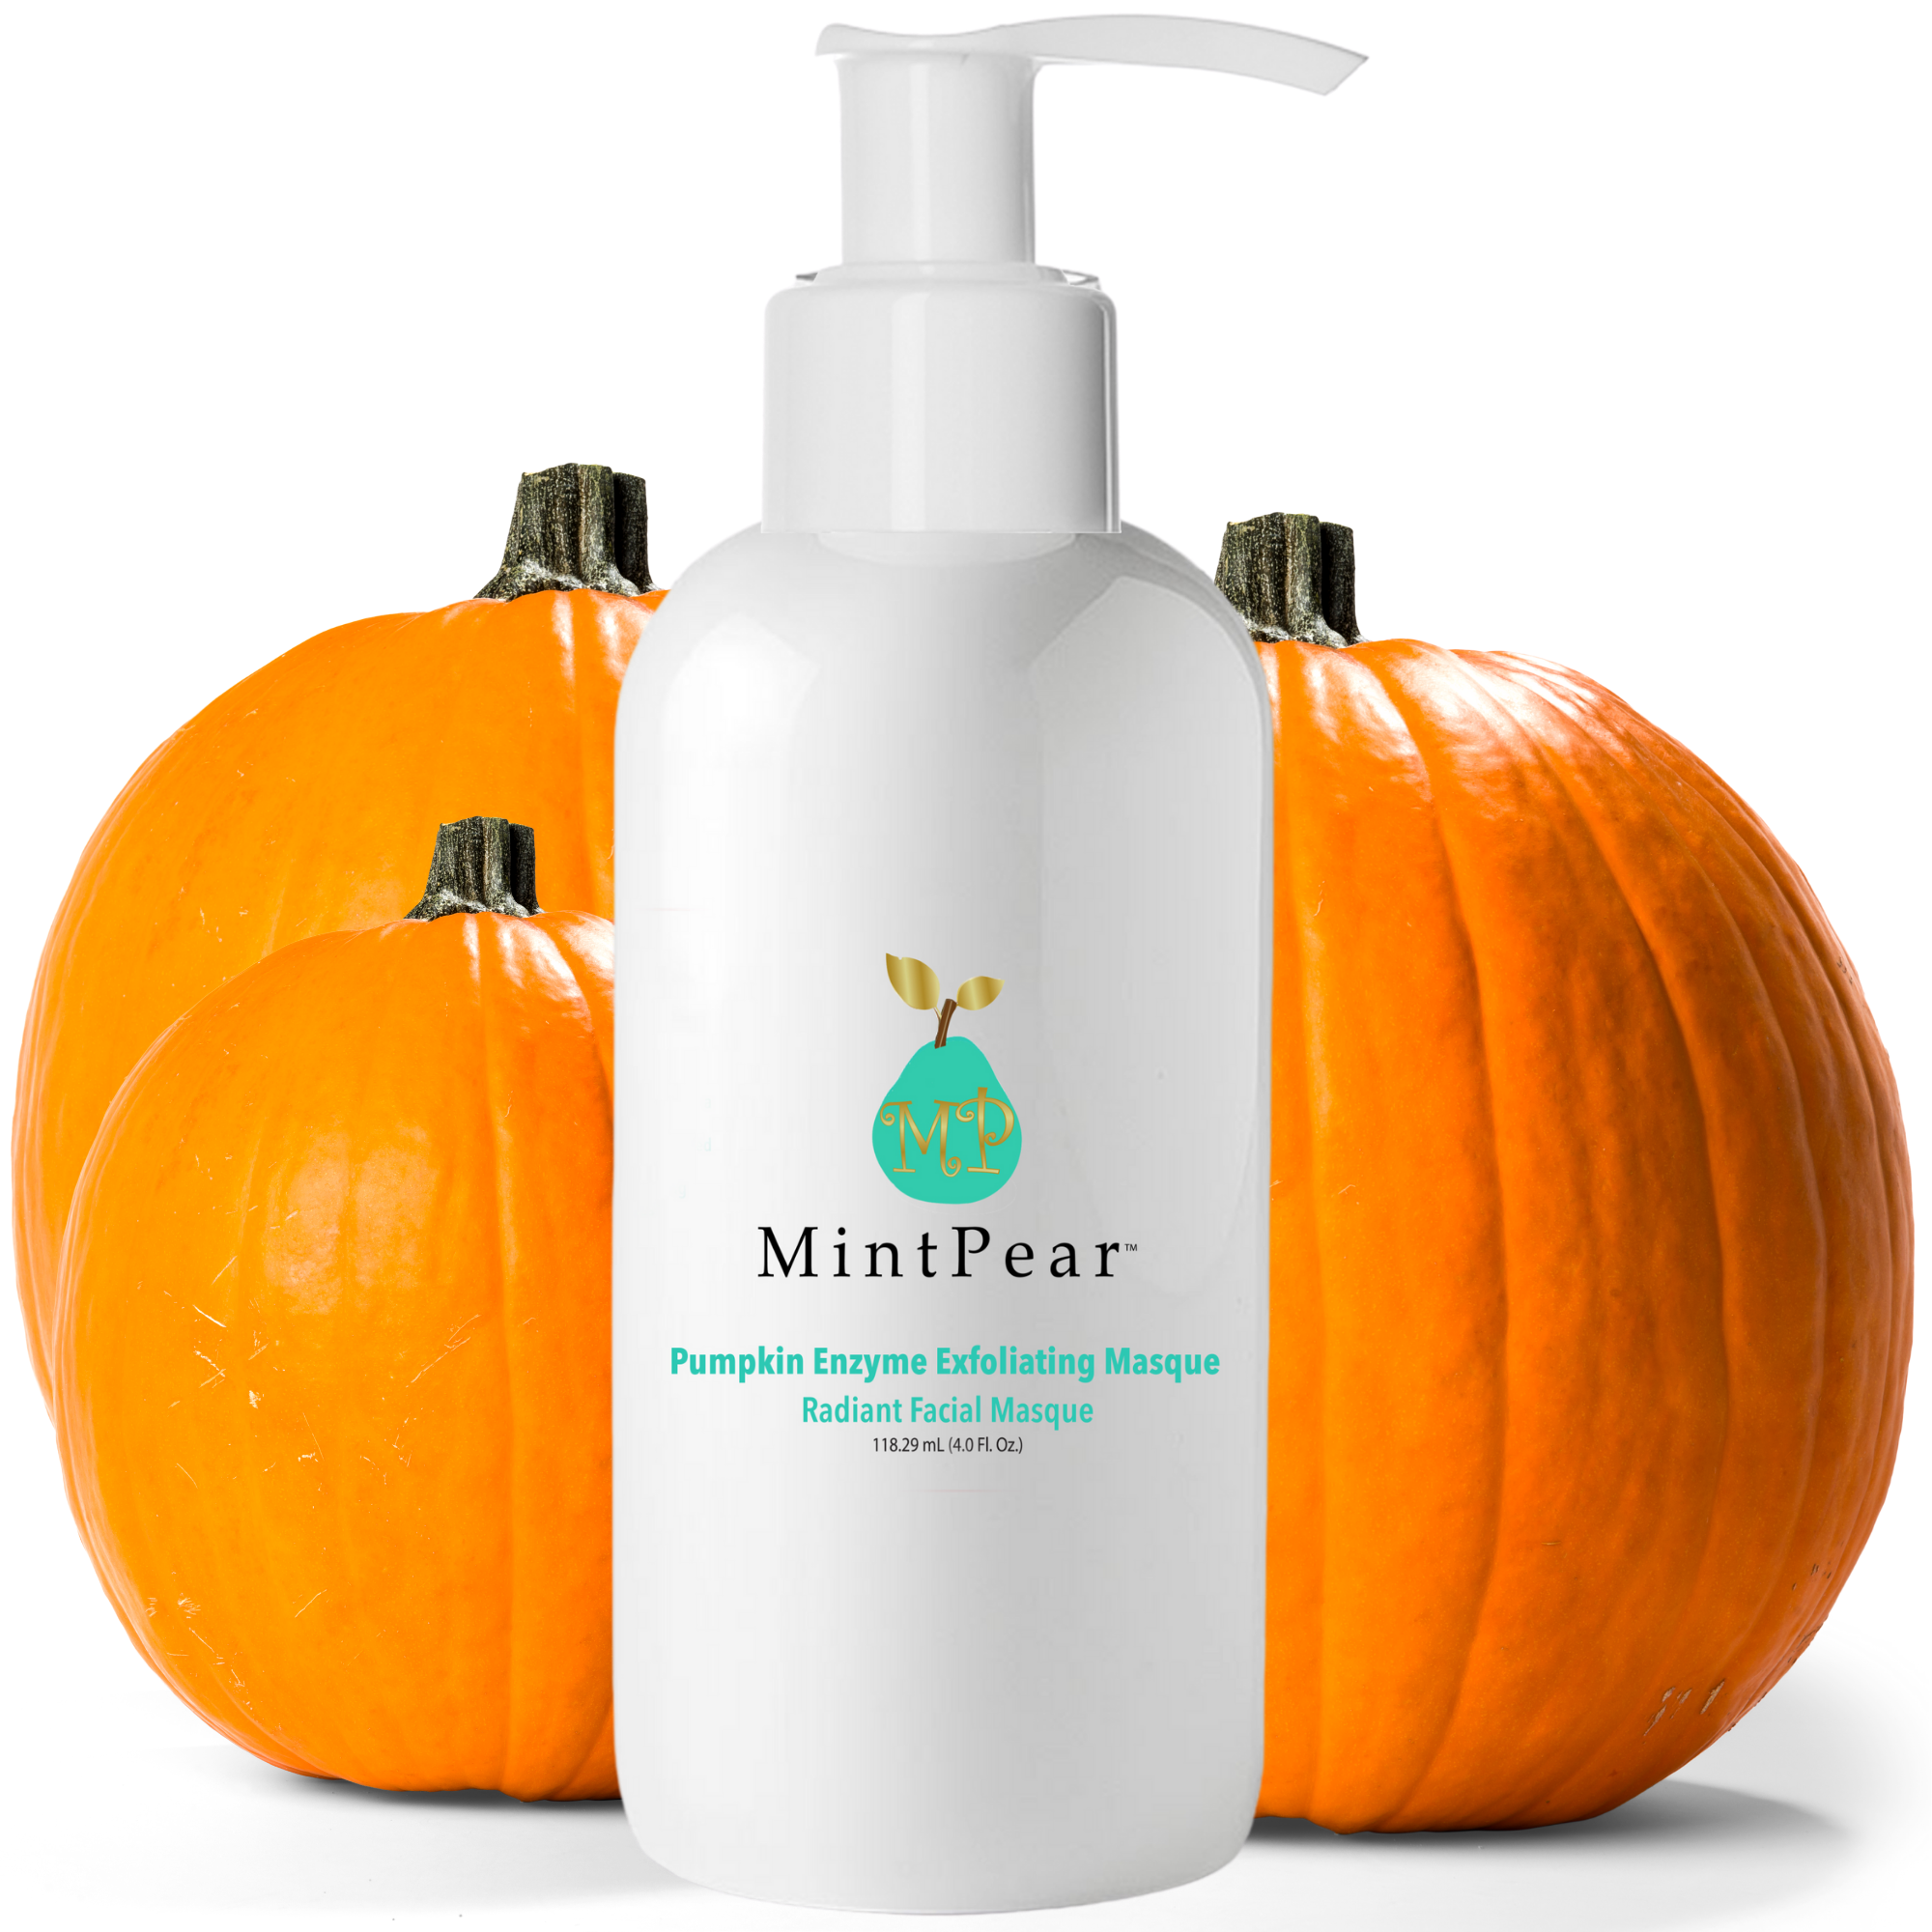 The Best Pumpkin Enzyme Exfoliating Masque. How to get Beautiful Skin